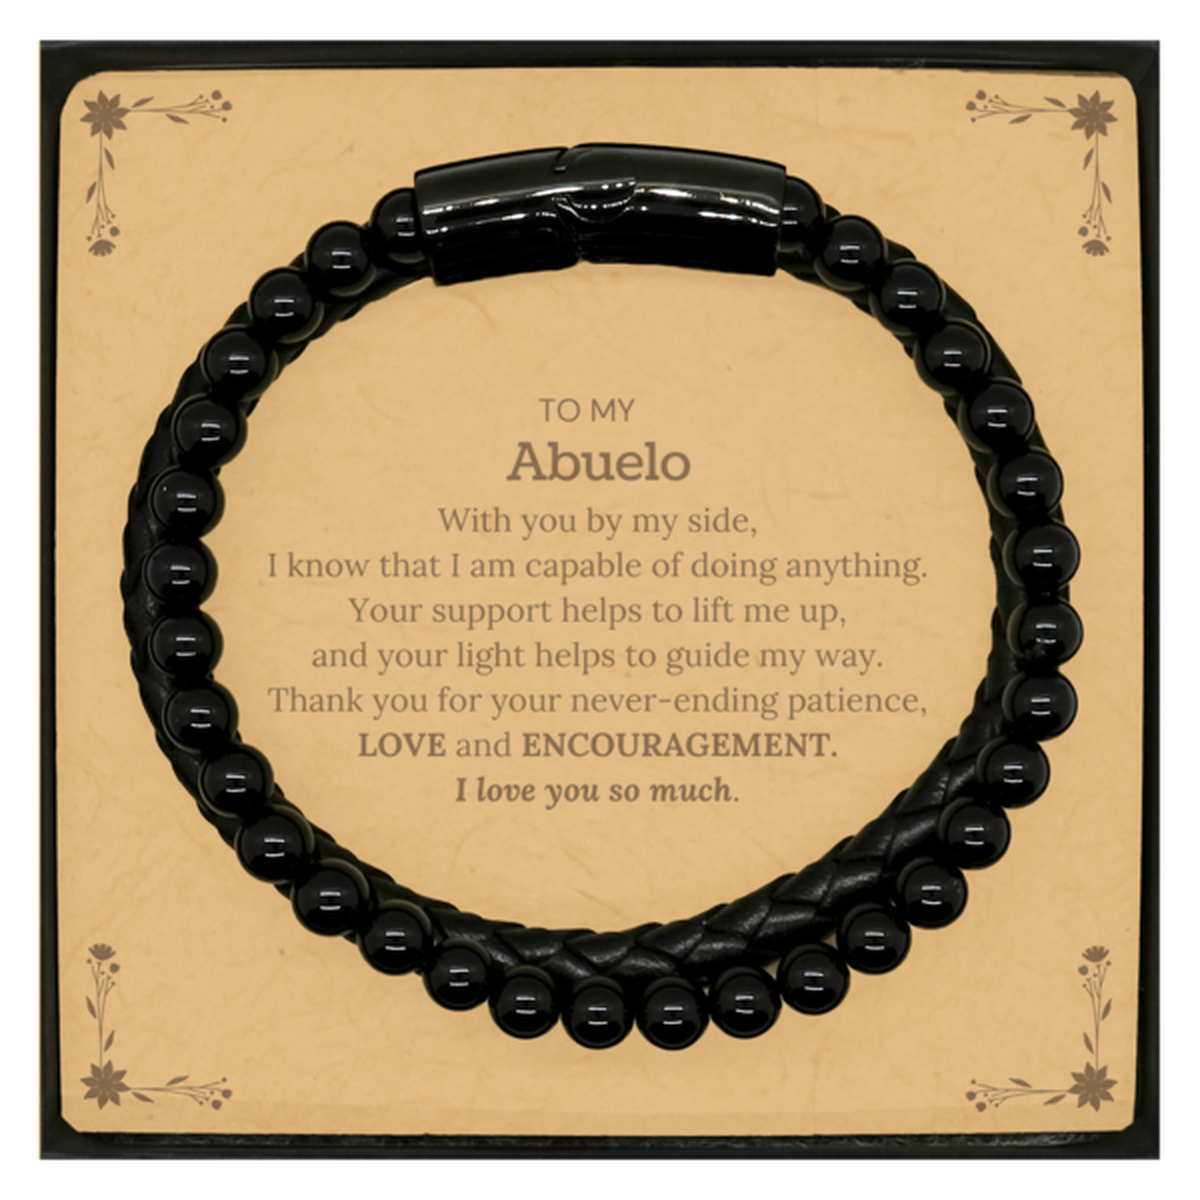 Appreciation Abuelo Stone Leather Bracelets Gifts, To My Abuelo Birthday Christmas Wedding Keepsake Gifts for Abuelo With you by my side, I know that I am capable of doing anything. I love you so much